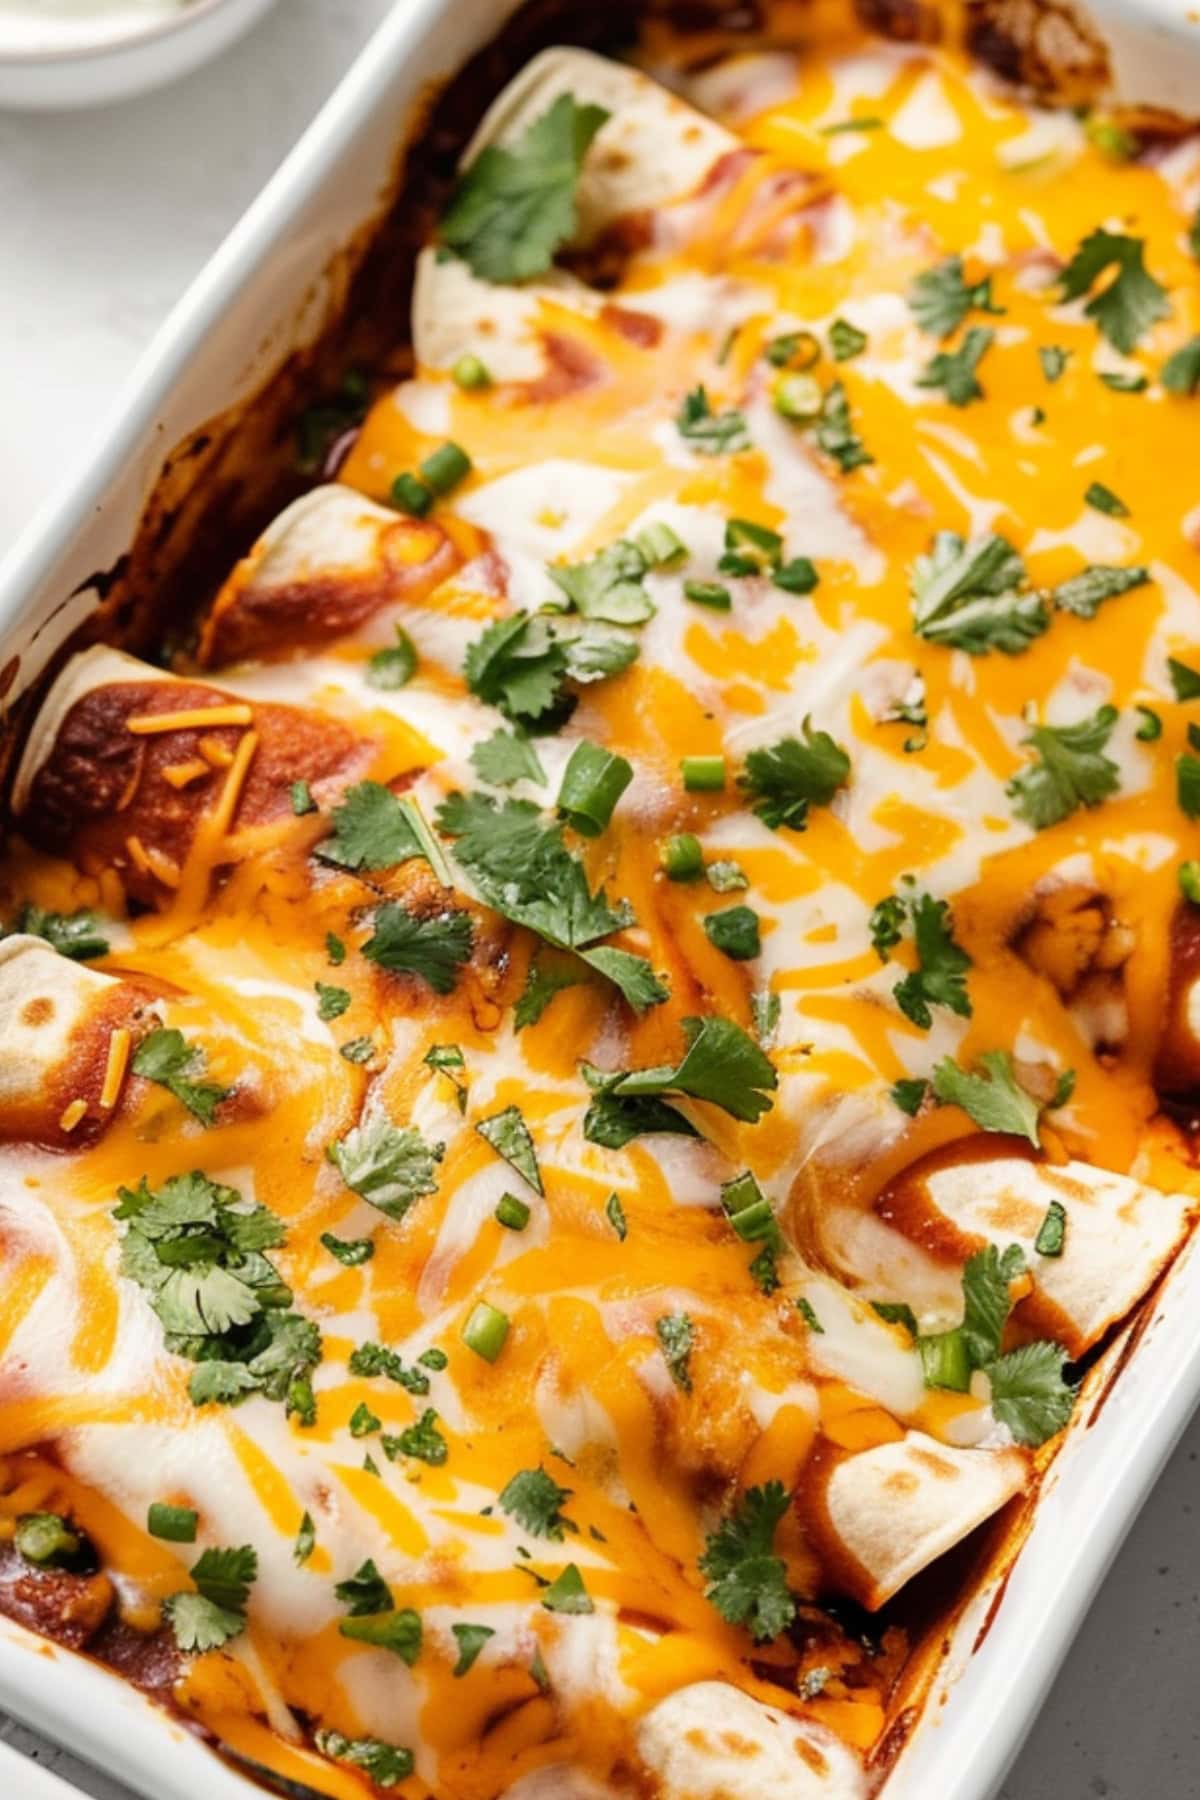 Beef enchiladas in a baking dish garnished with parsley on top.